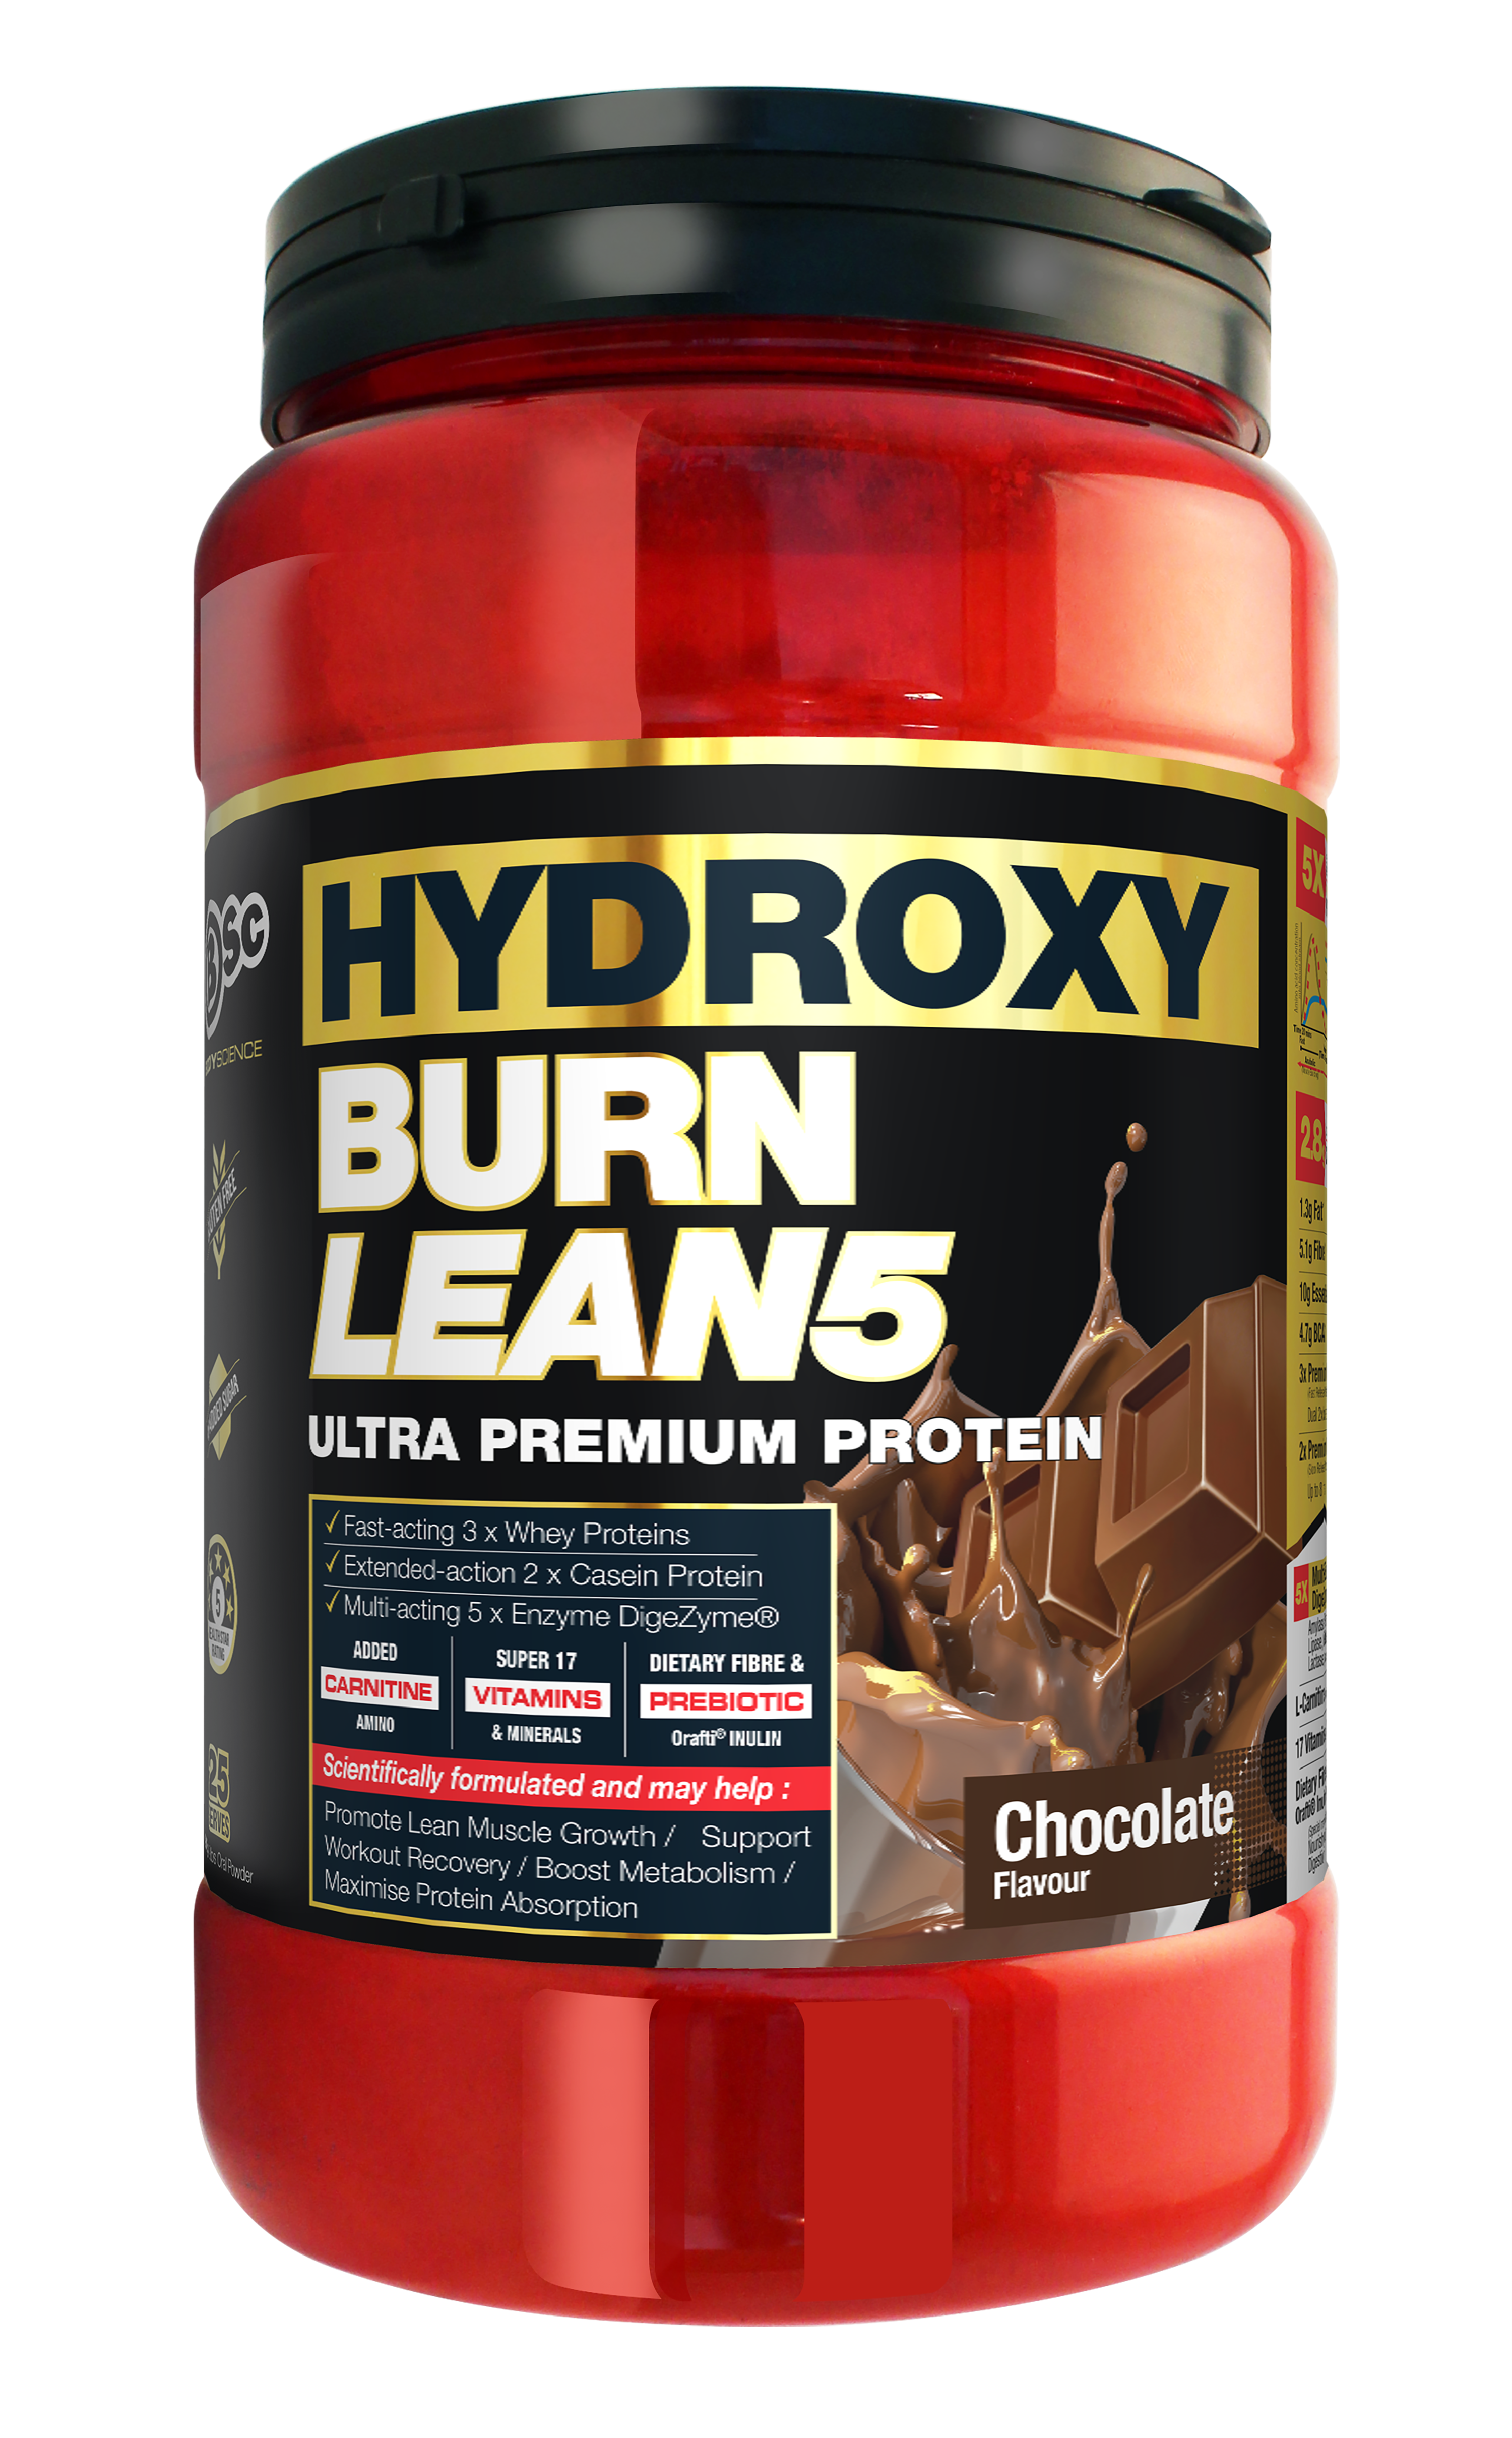 BSc HydroxyBurn Lean5 Low Carb Protein - Super Nutrition